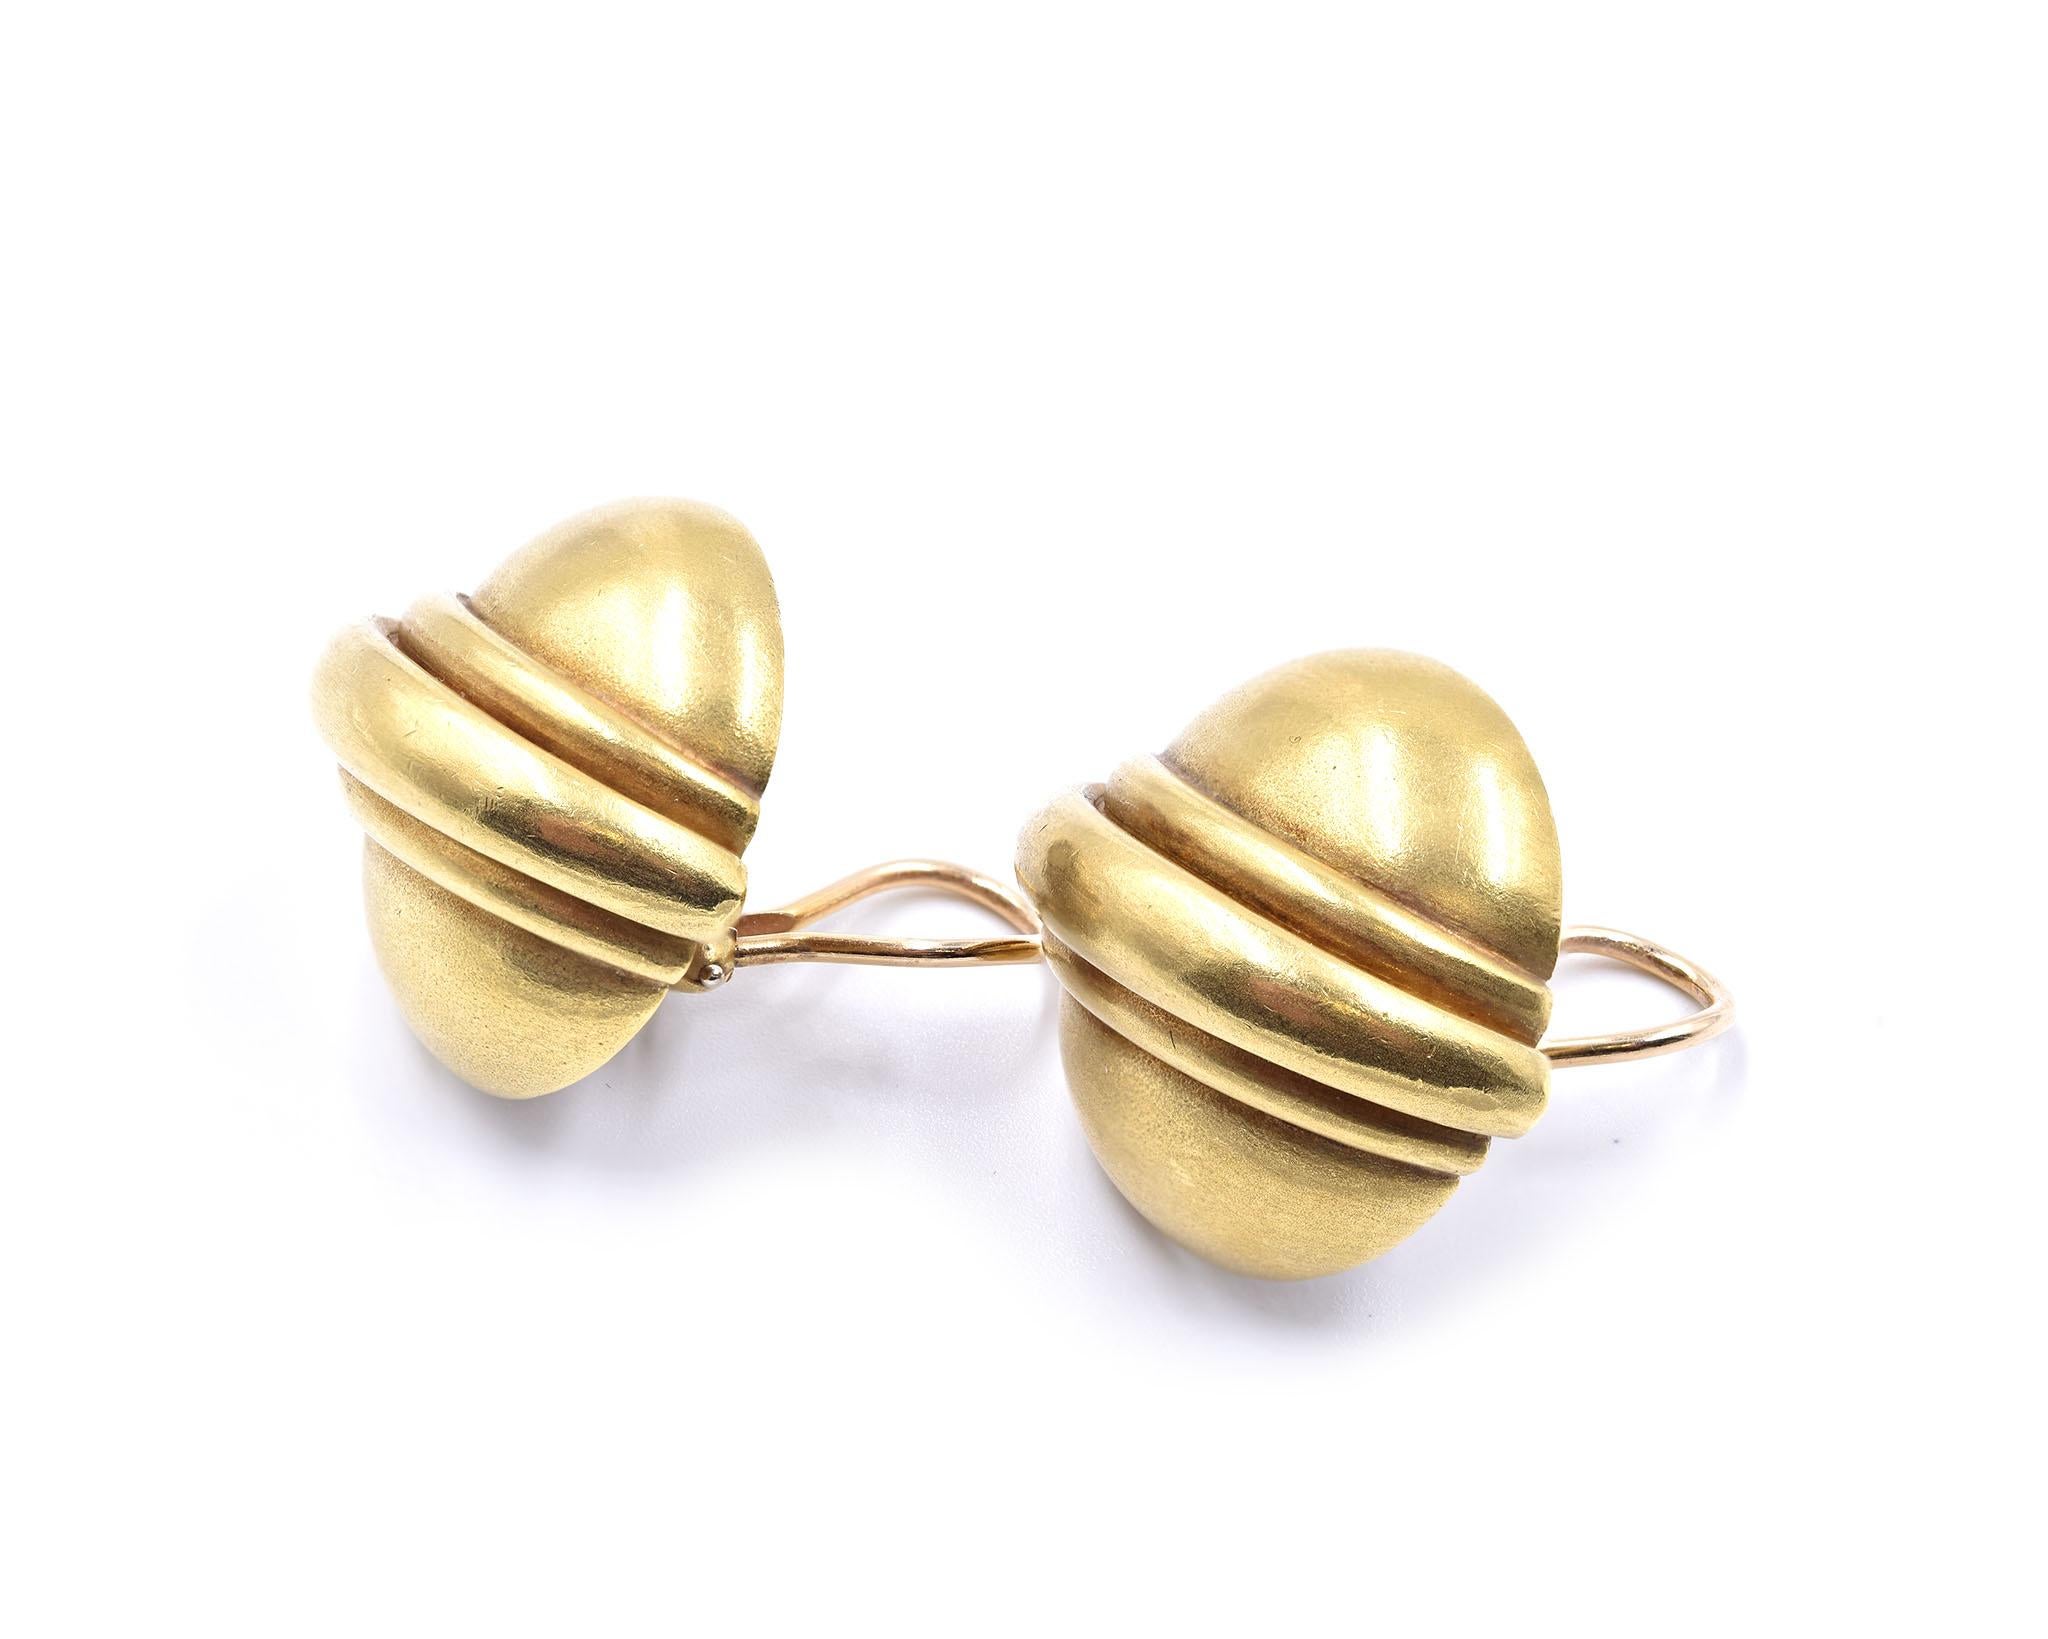 Designer: Kisselstein Cord
Material: 18K yellow gold
Weight: 34.07 grams
